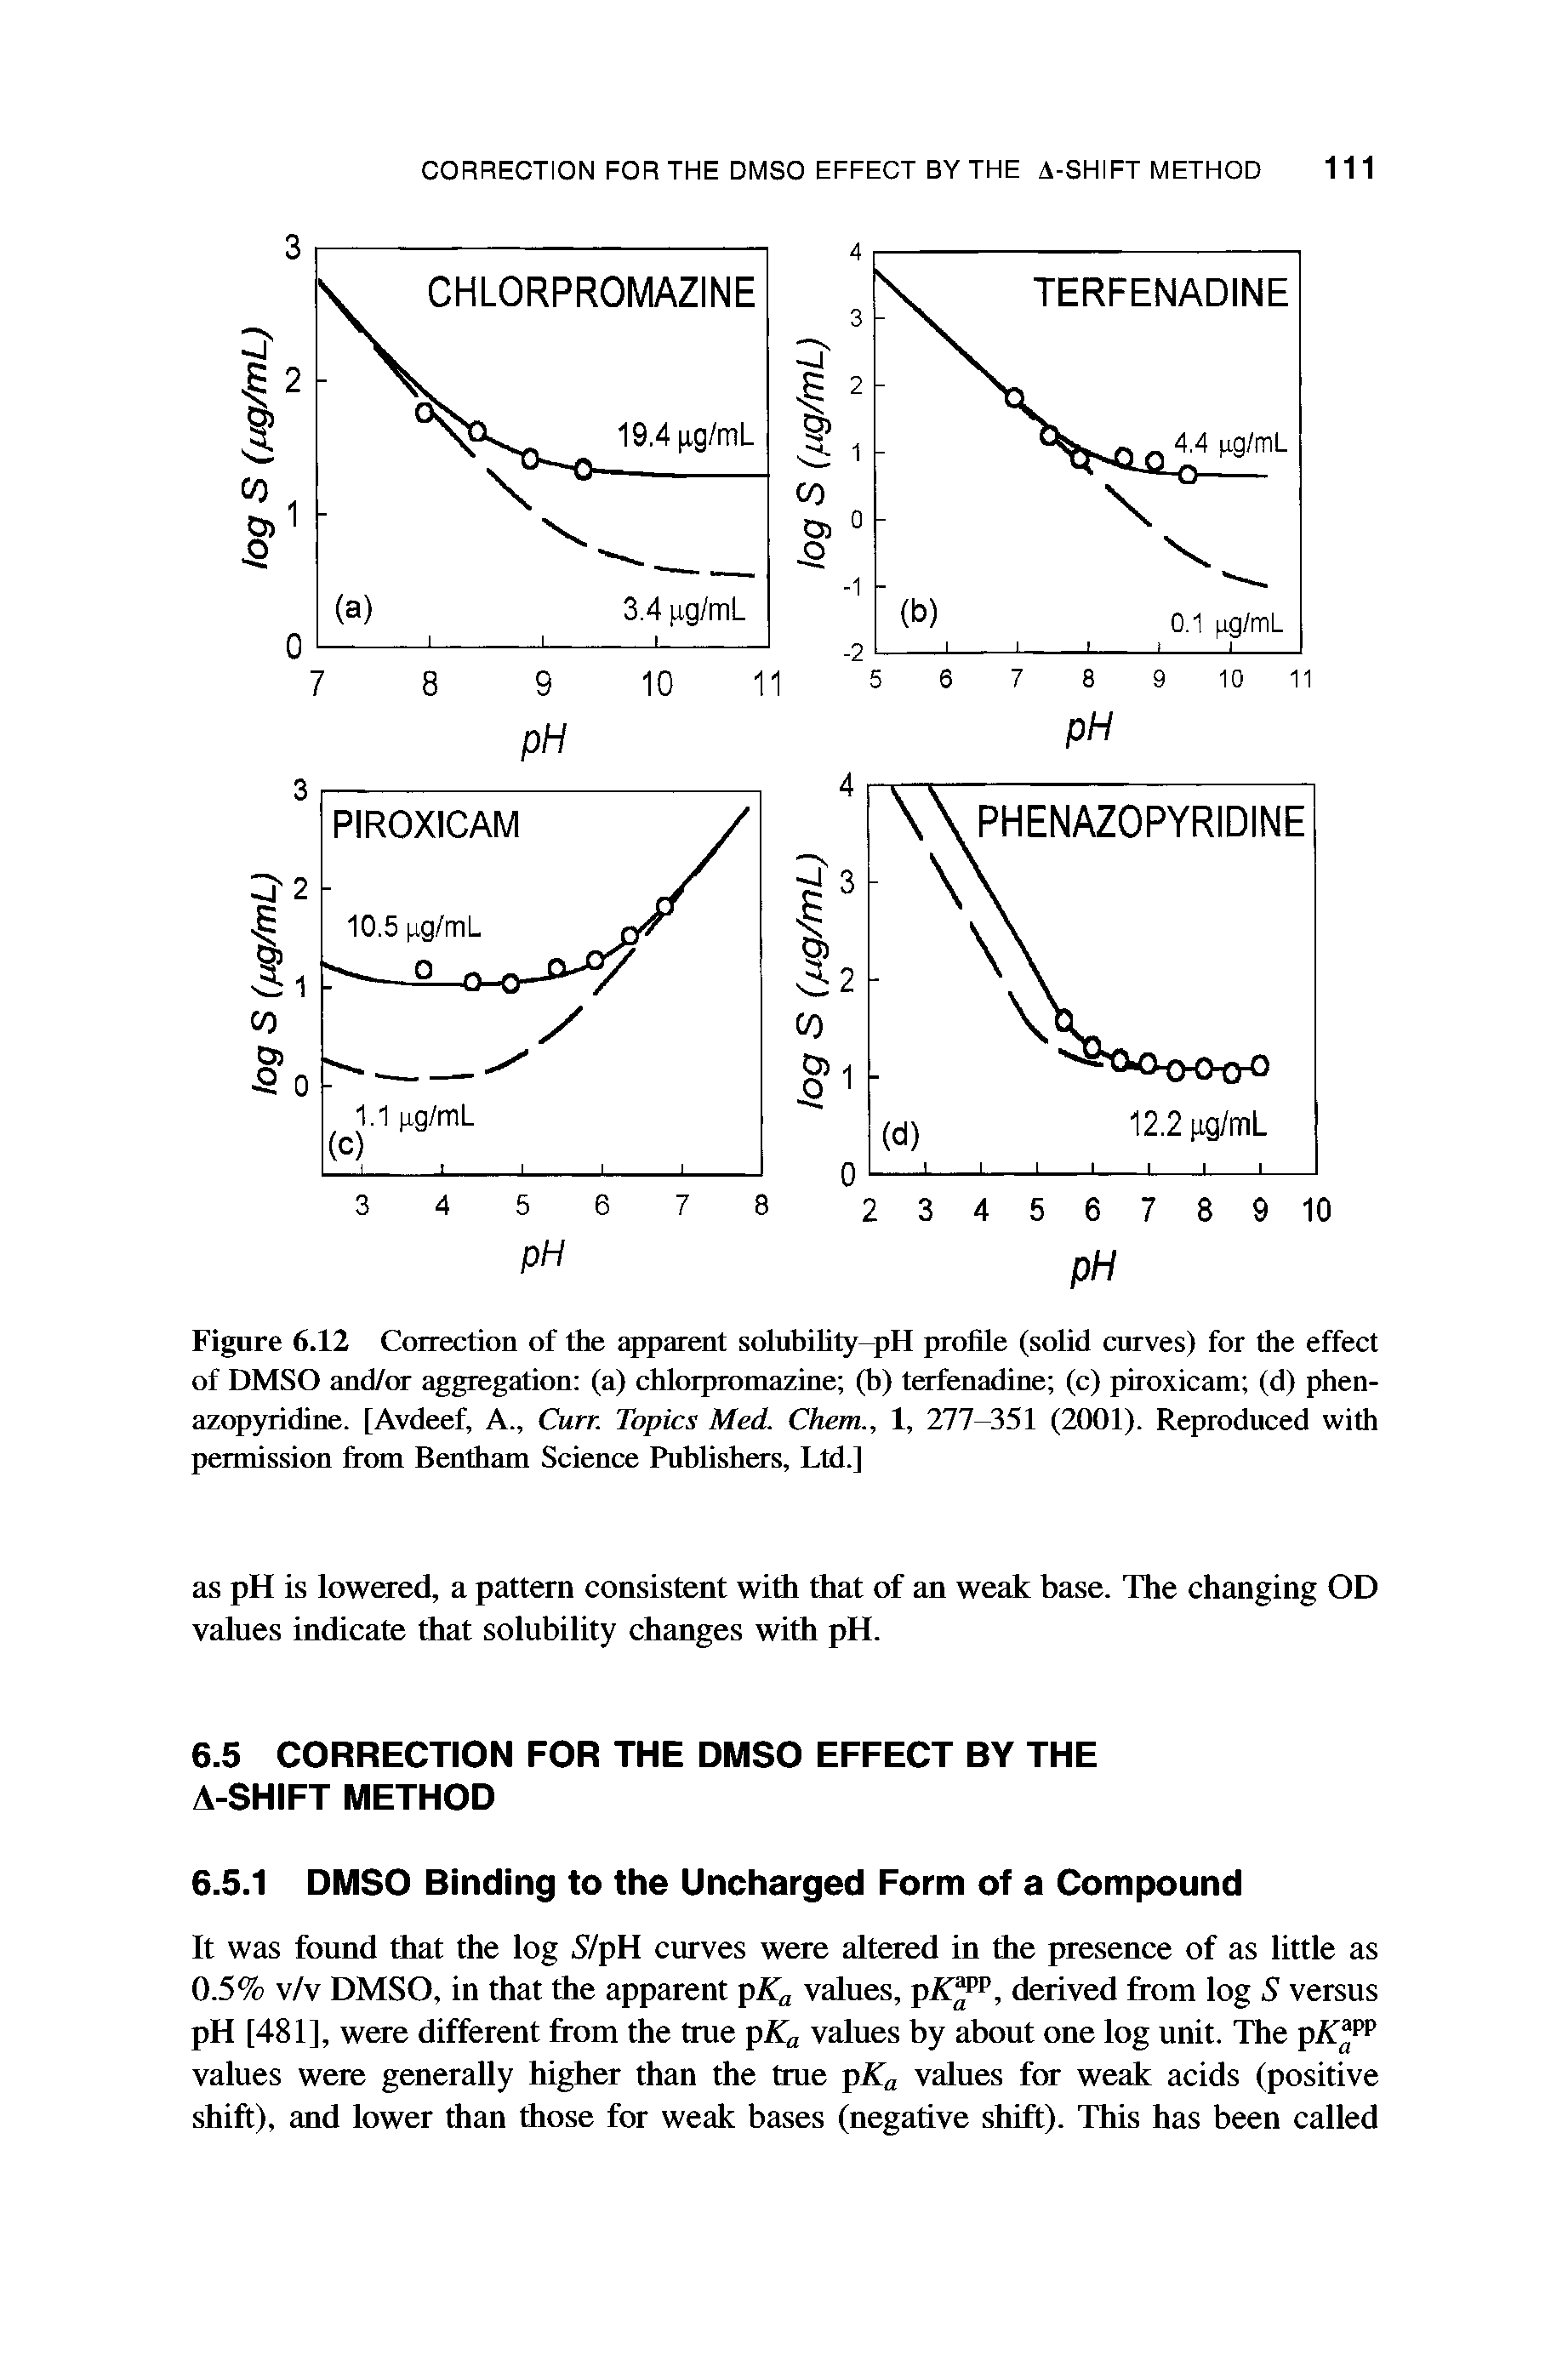 Figure 6.12 Correction of the apparent solubility pH profile (solid curves) for the effect of DMSO and/or aggregation (a) chlorpromazine (b) terfenadine (c) piroxicam (d) phen-azopyridine. [Avdeef, A., Curr. Topics Med. Chem., 1, 277-351 (2001). Reproduced with permission from Bentham Science Publishers, Ltd.]...